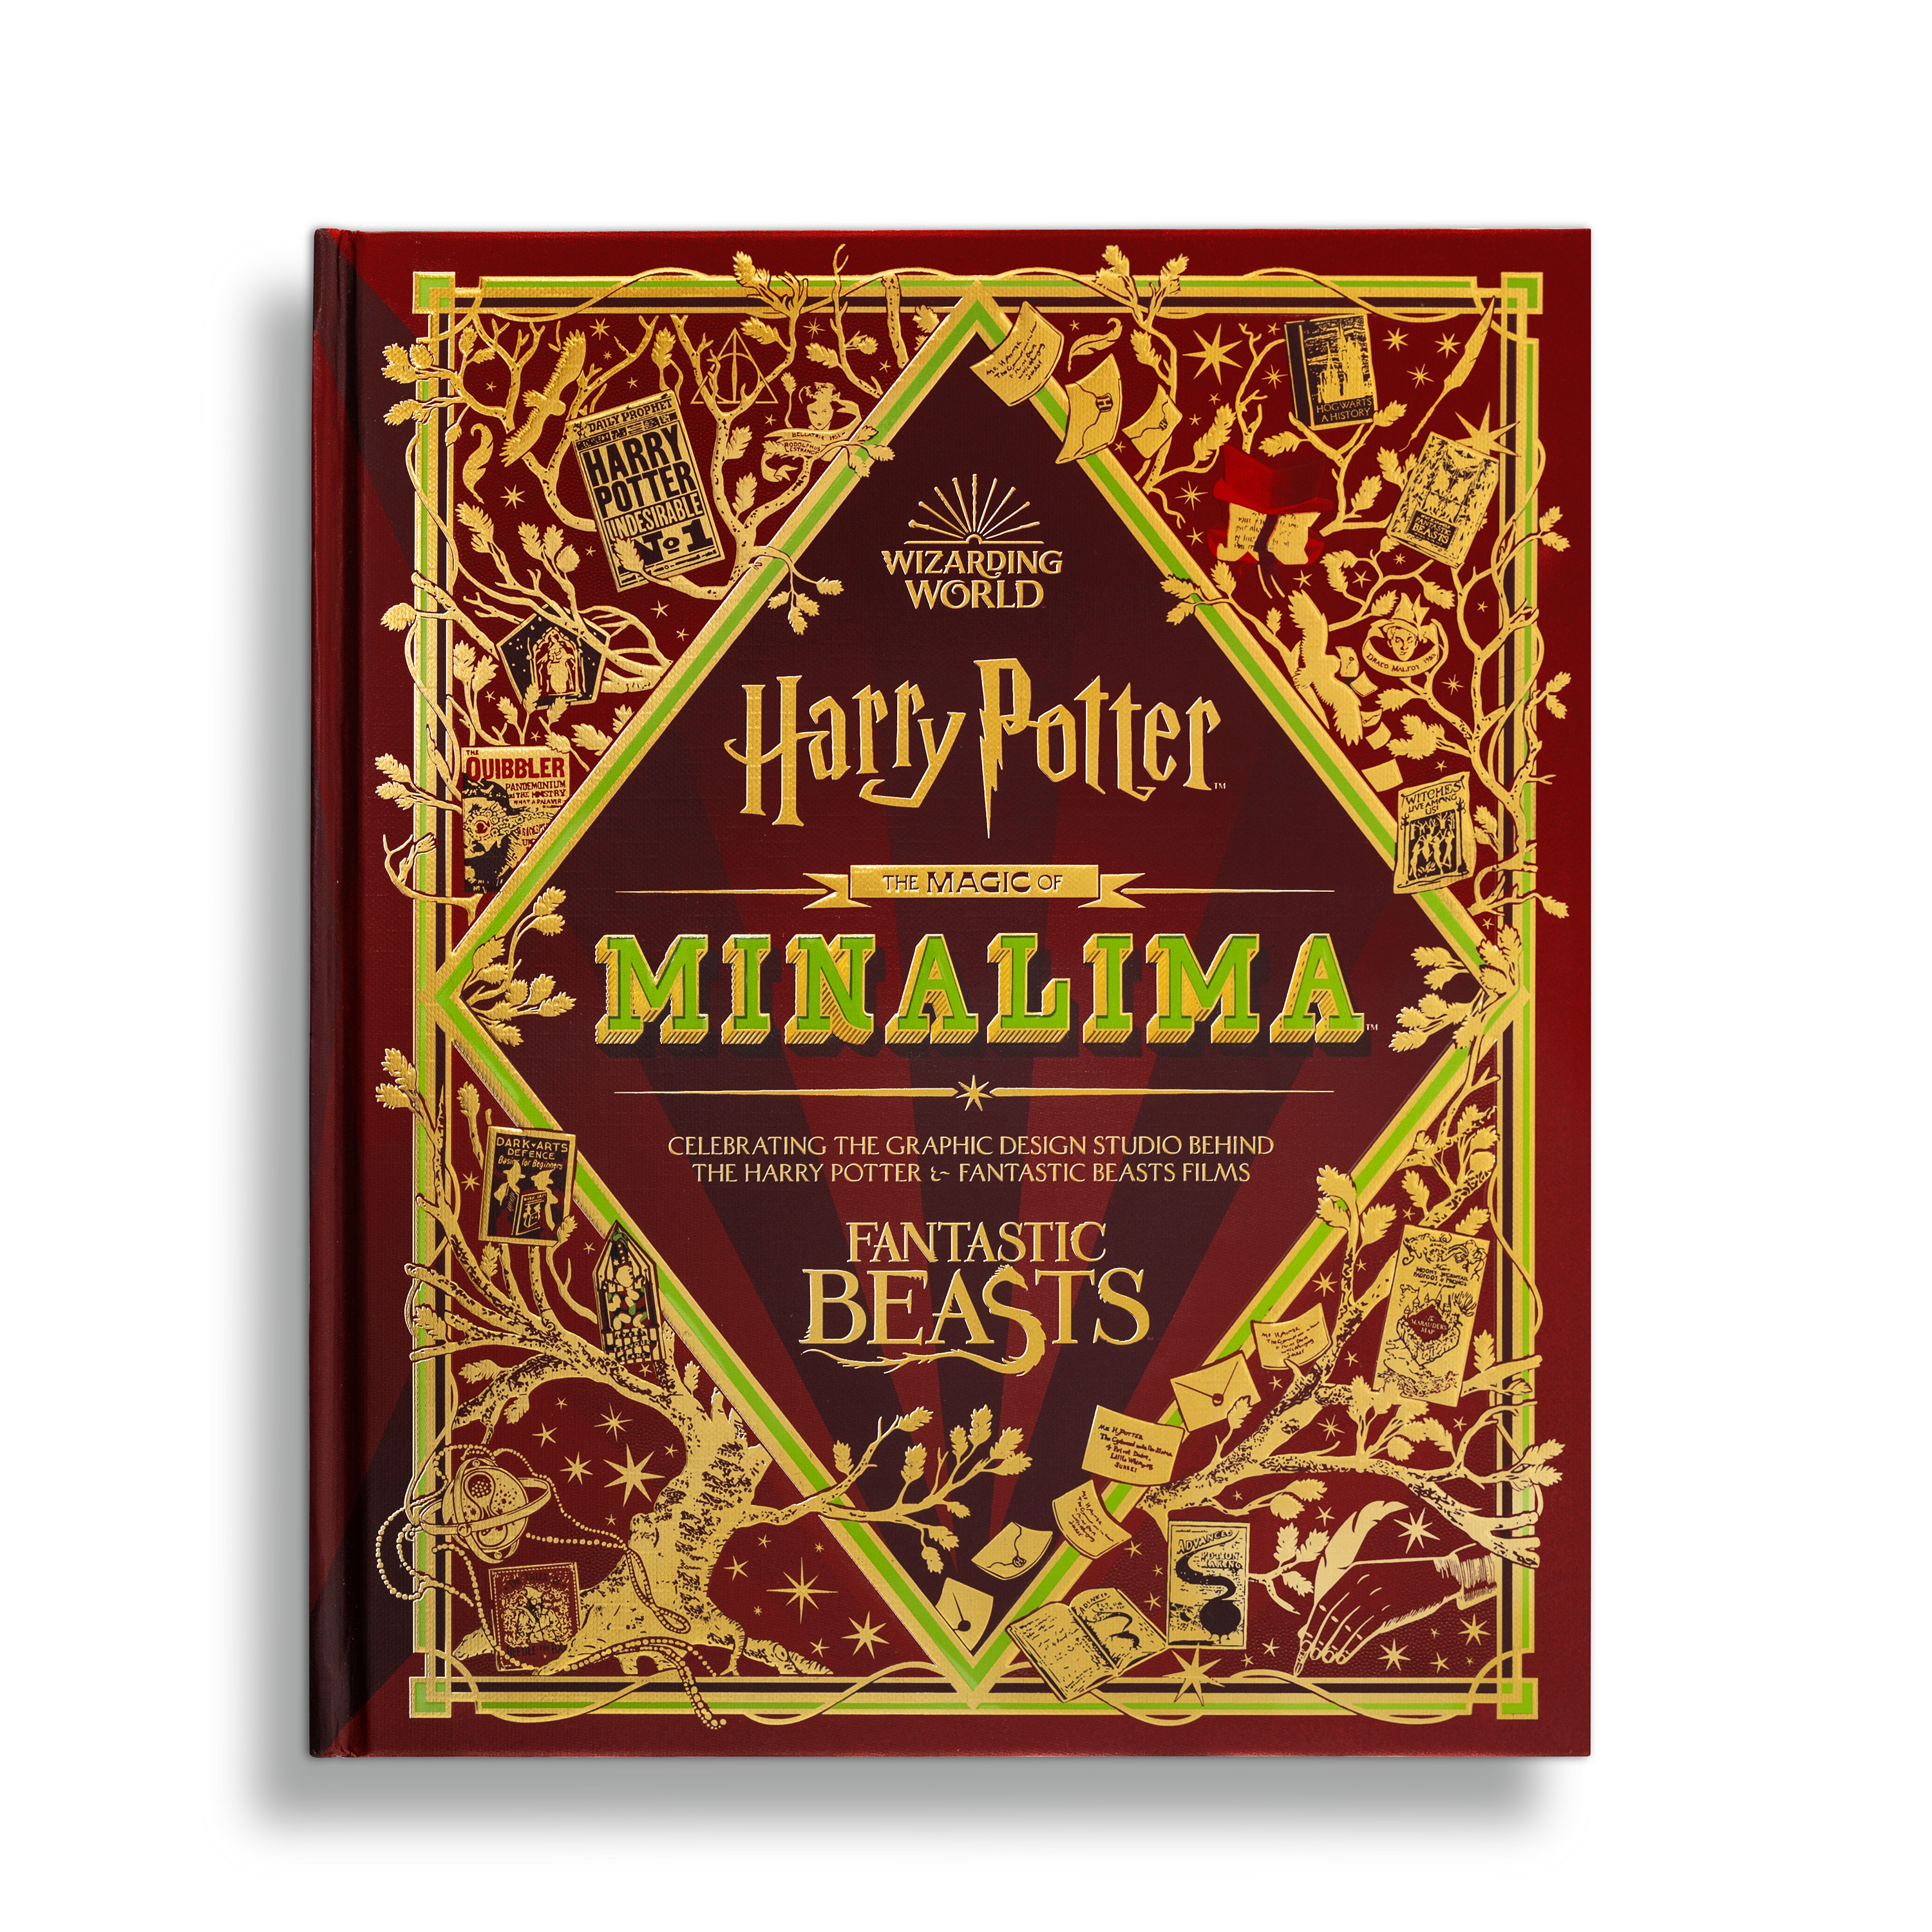 Harry Potter Mina Lima Edition Series Collection 2 Books Set by